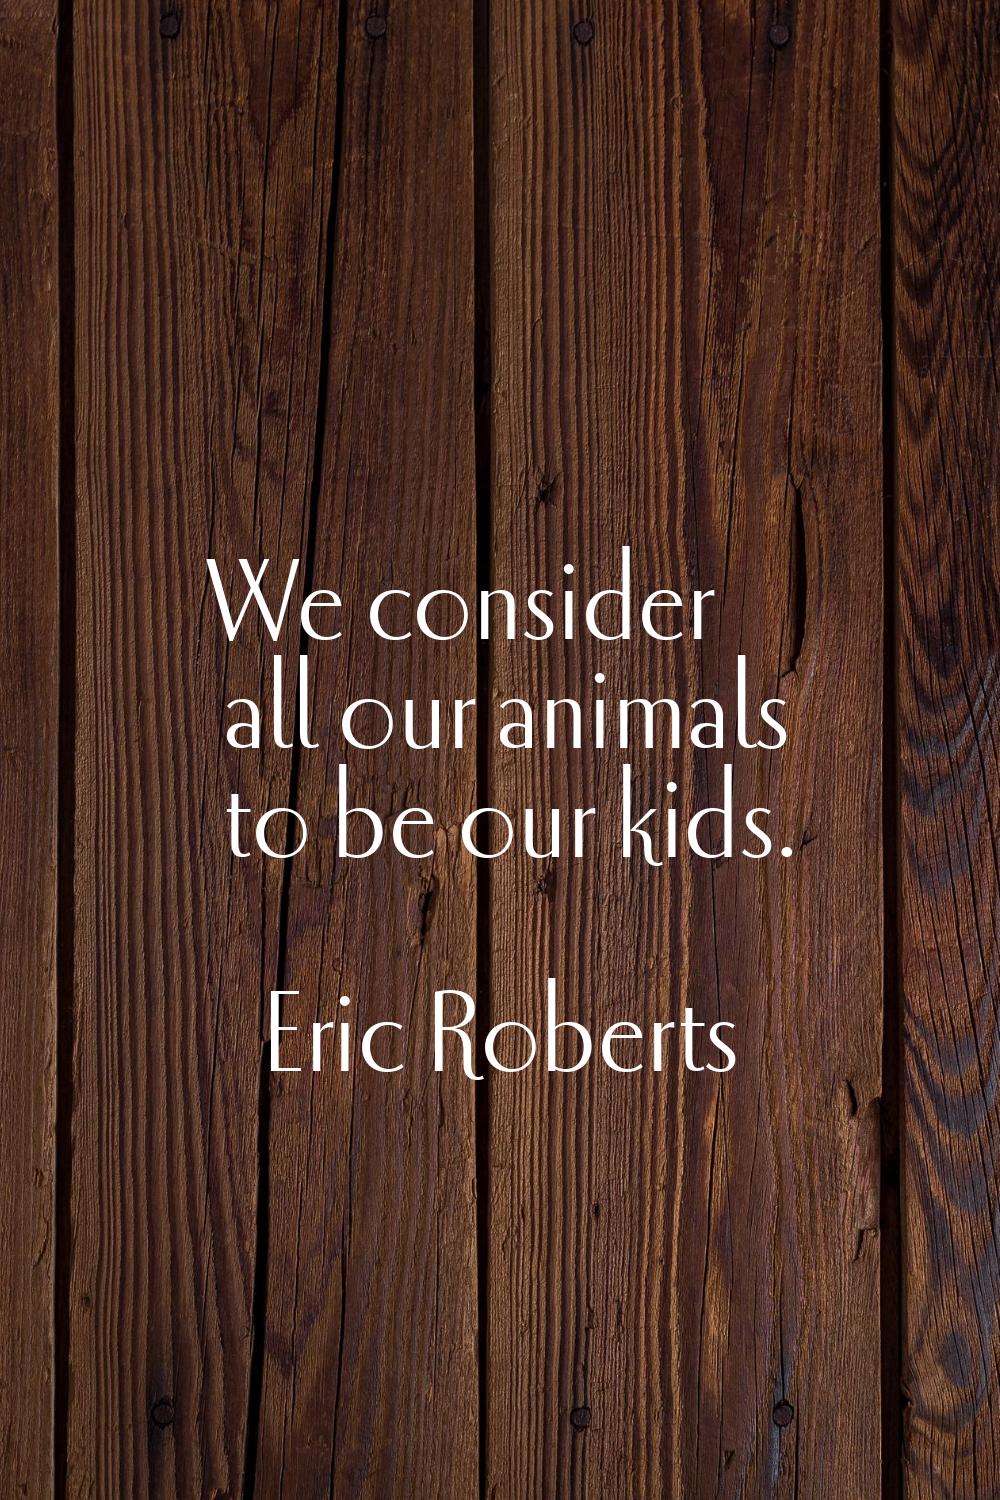 We consider all our animals to be our kids.